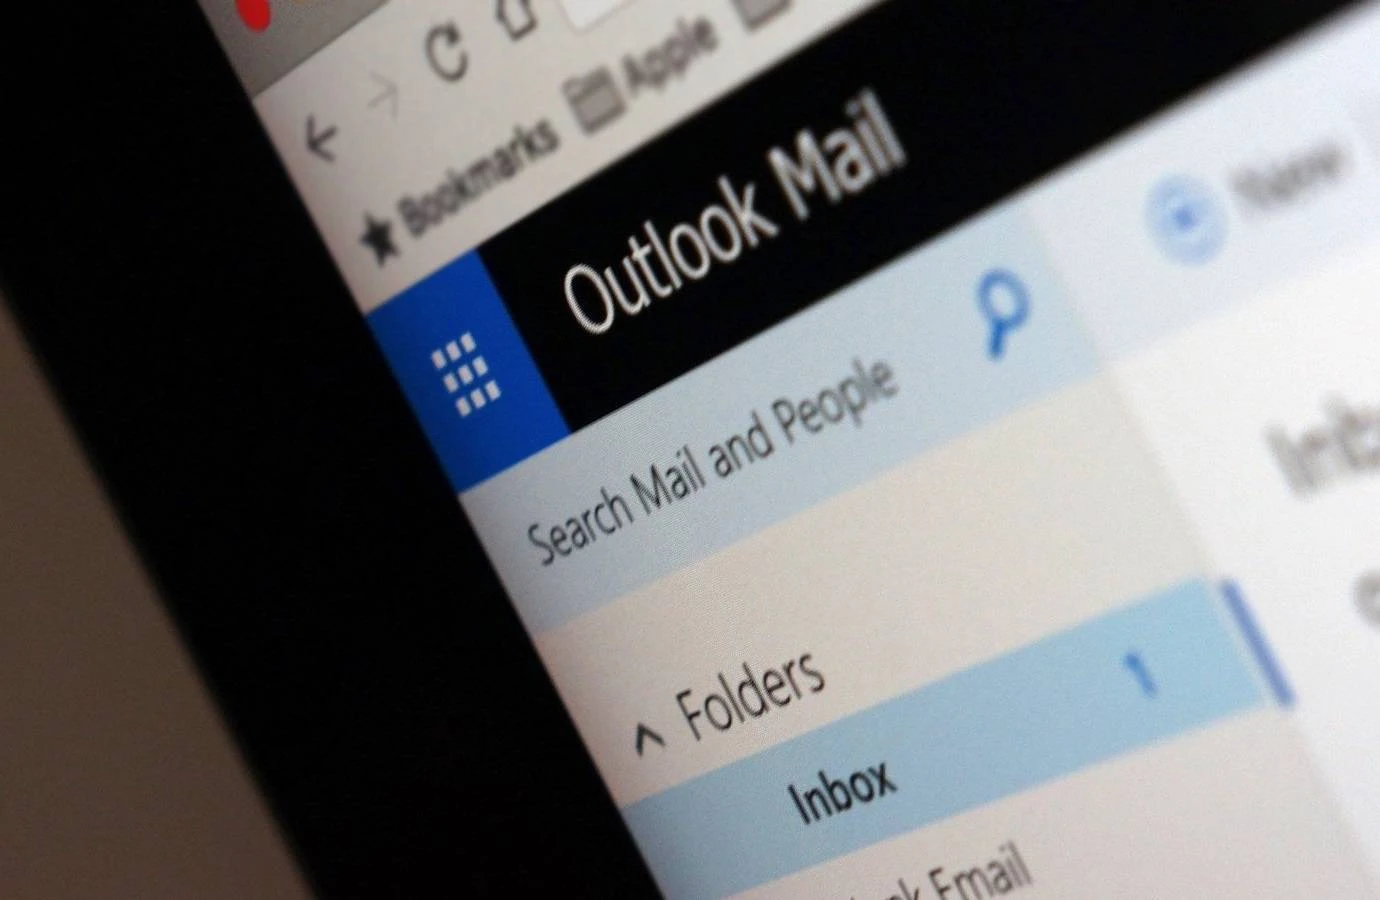 Microsoft reveals hackers accessed some Outlook.com user accounts for months